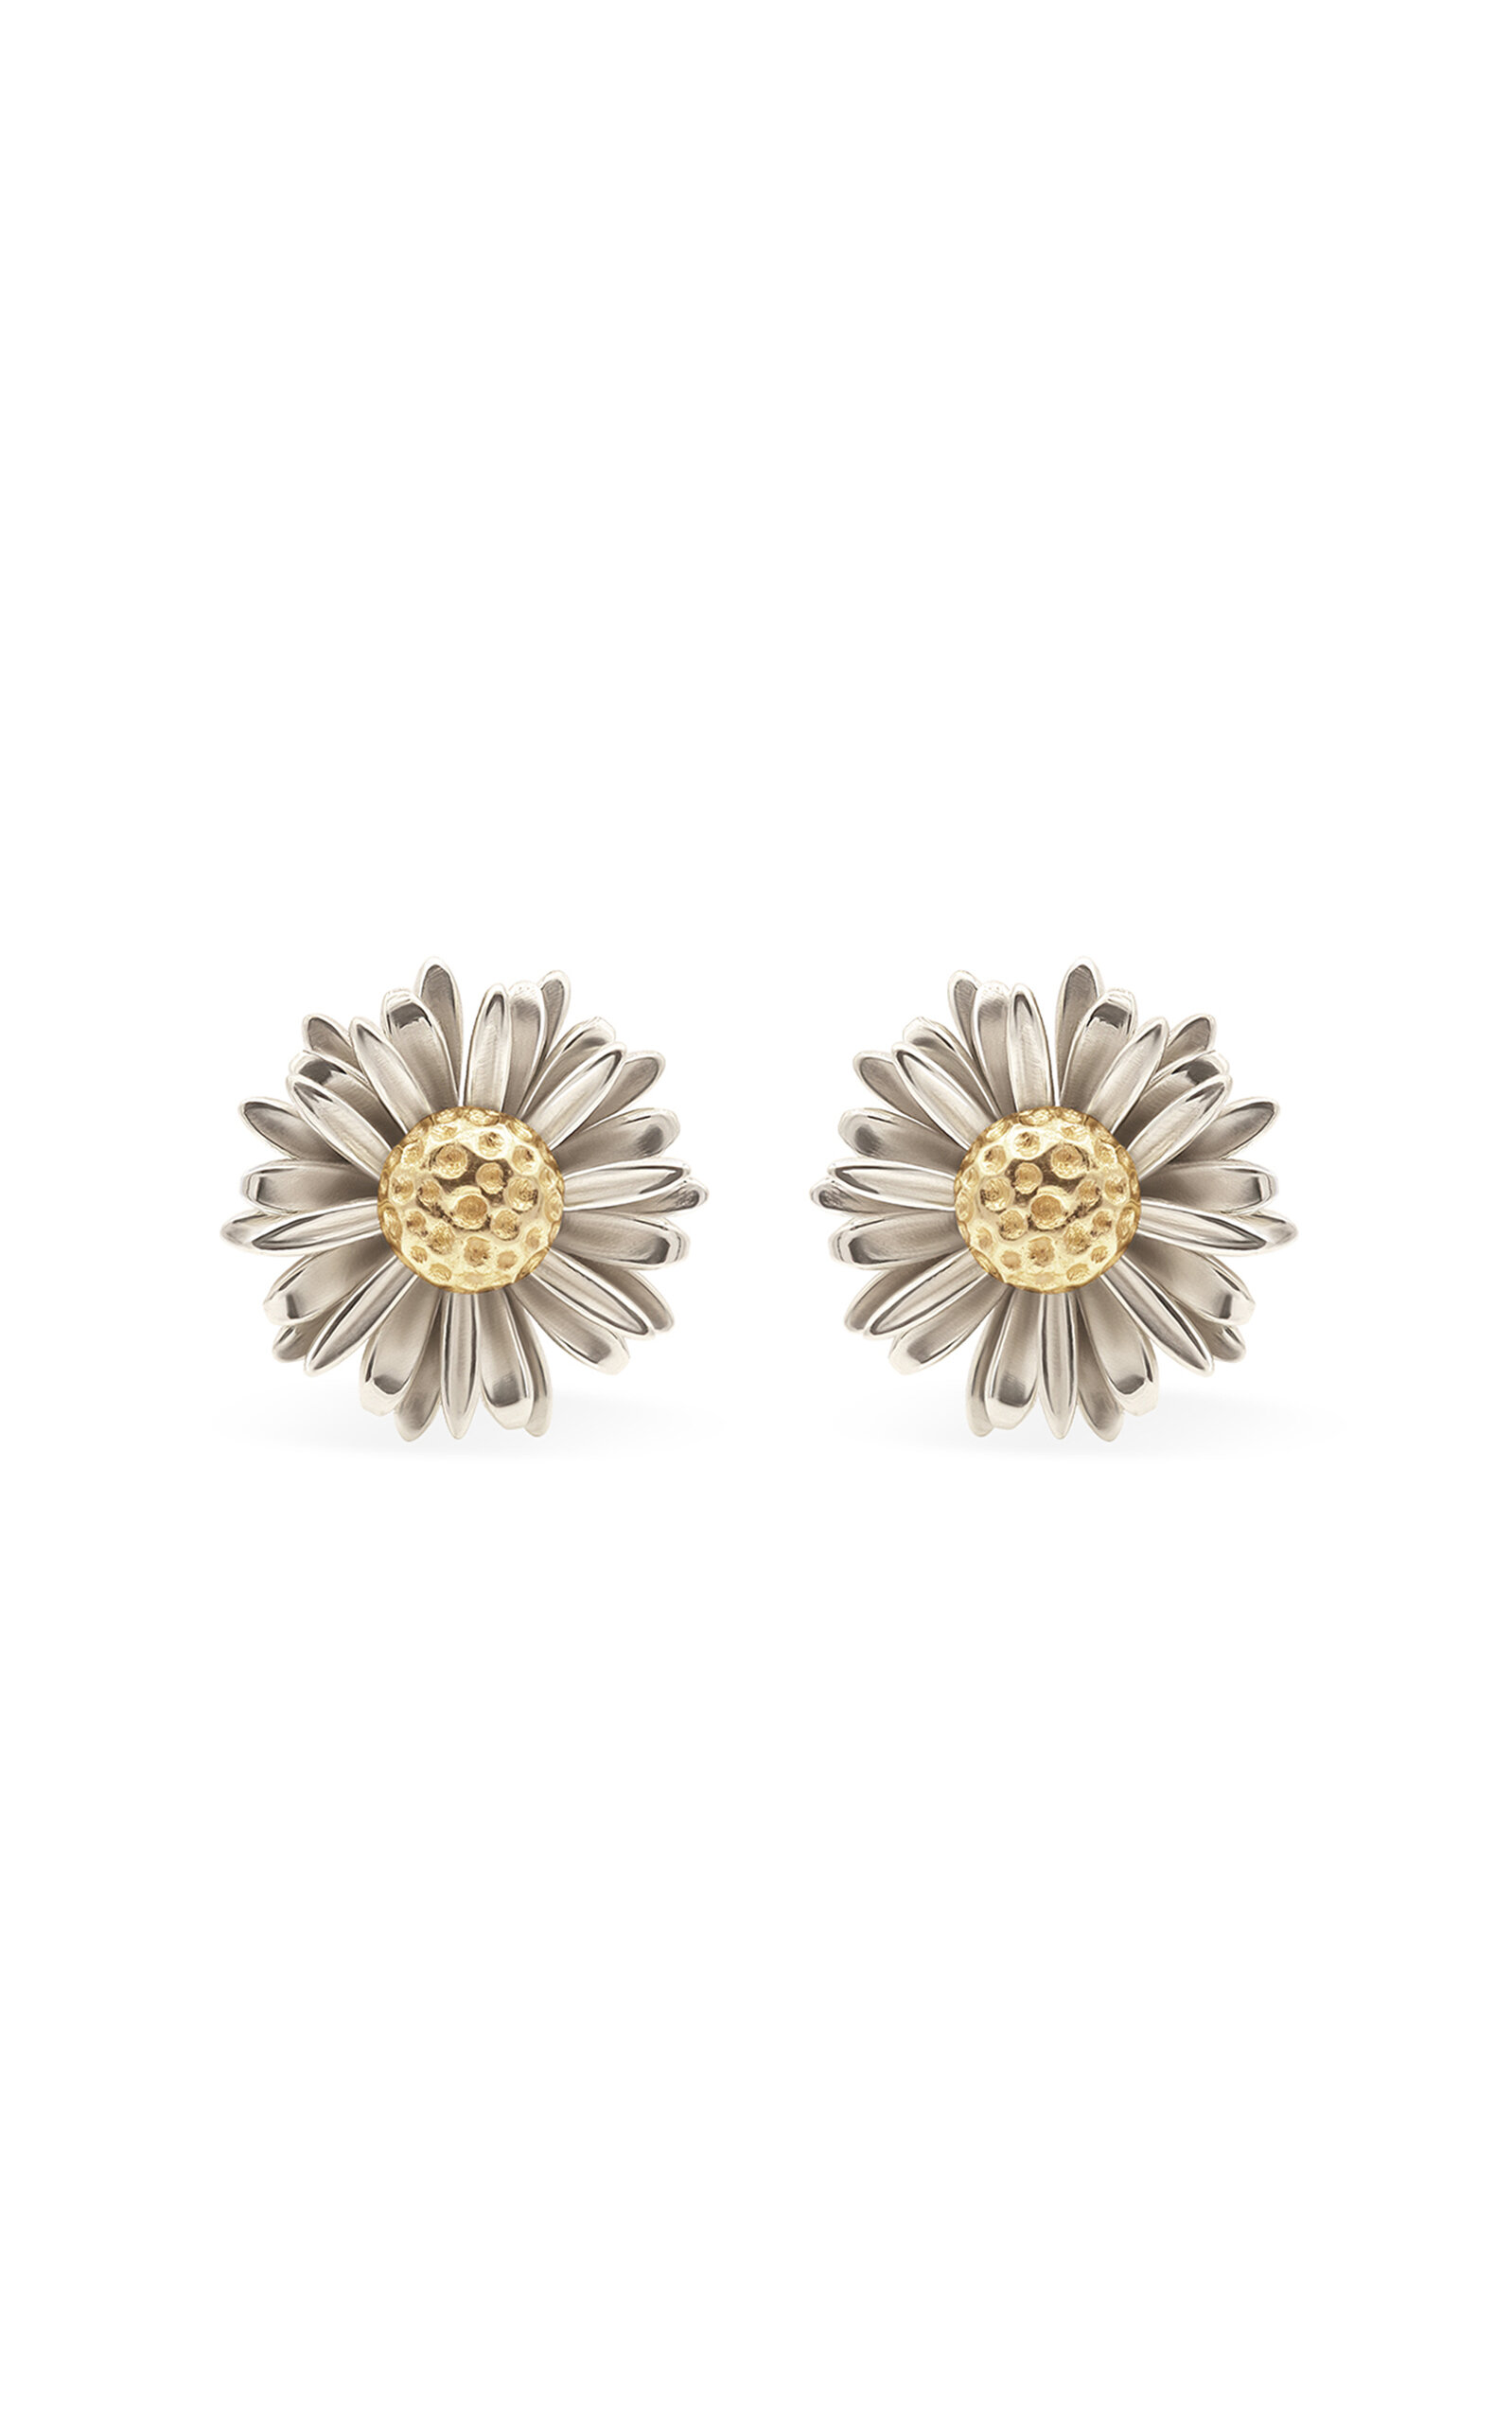 Daisy 14K Yellow and White Gold Earrings